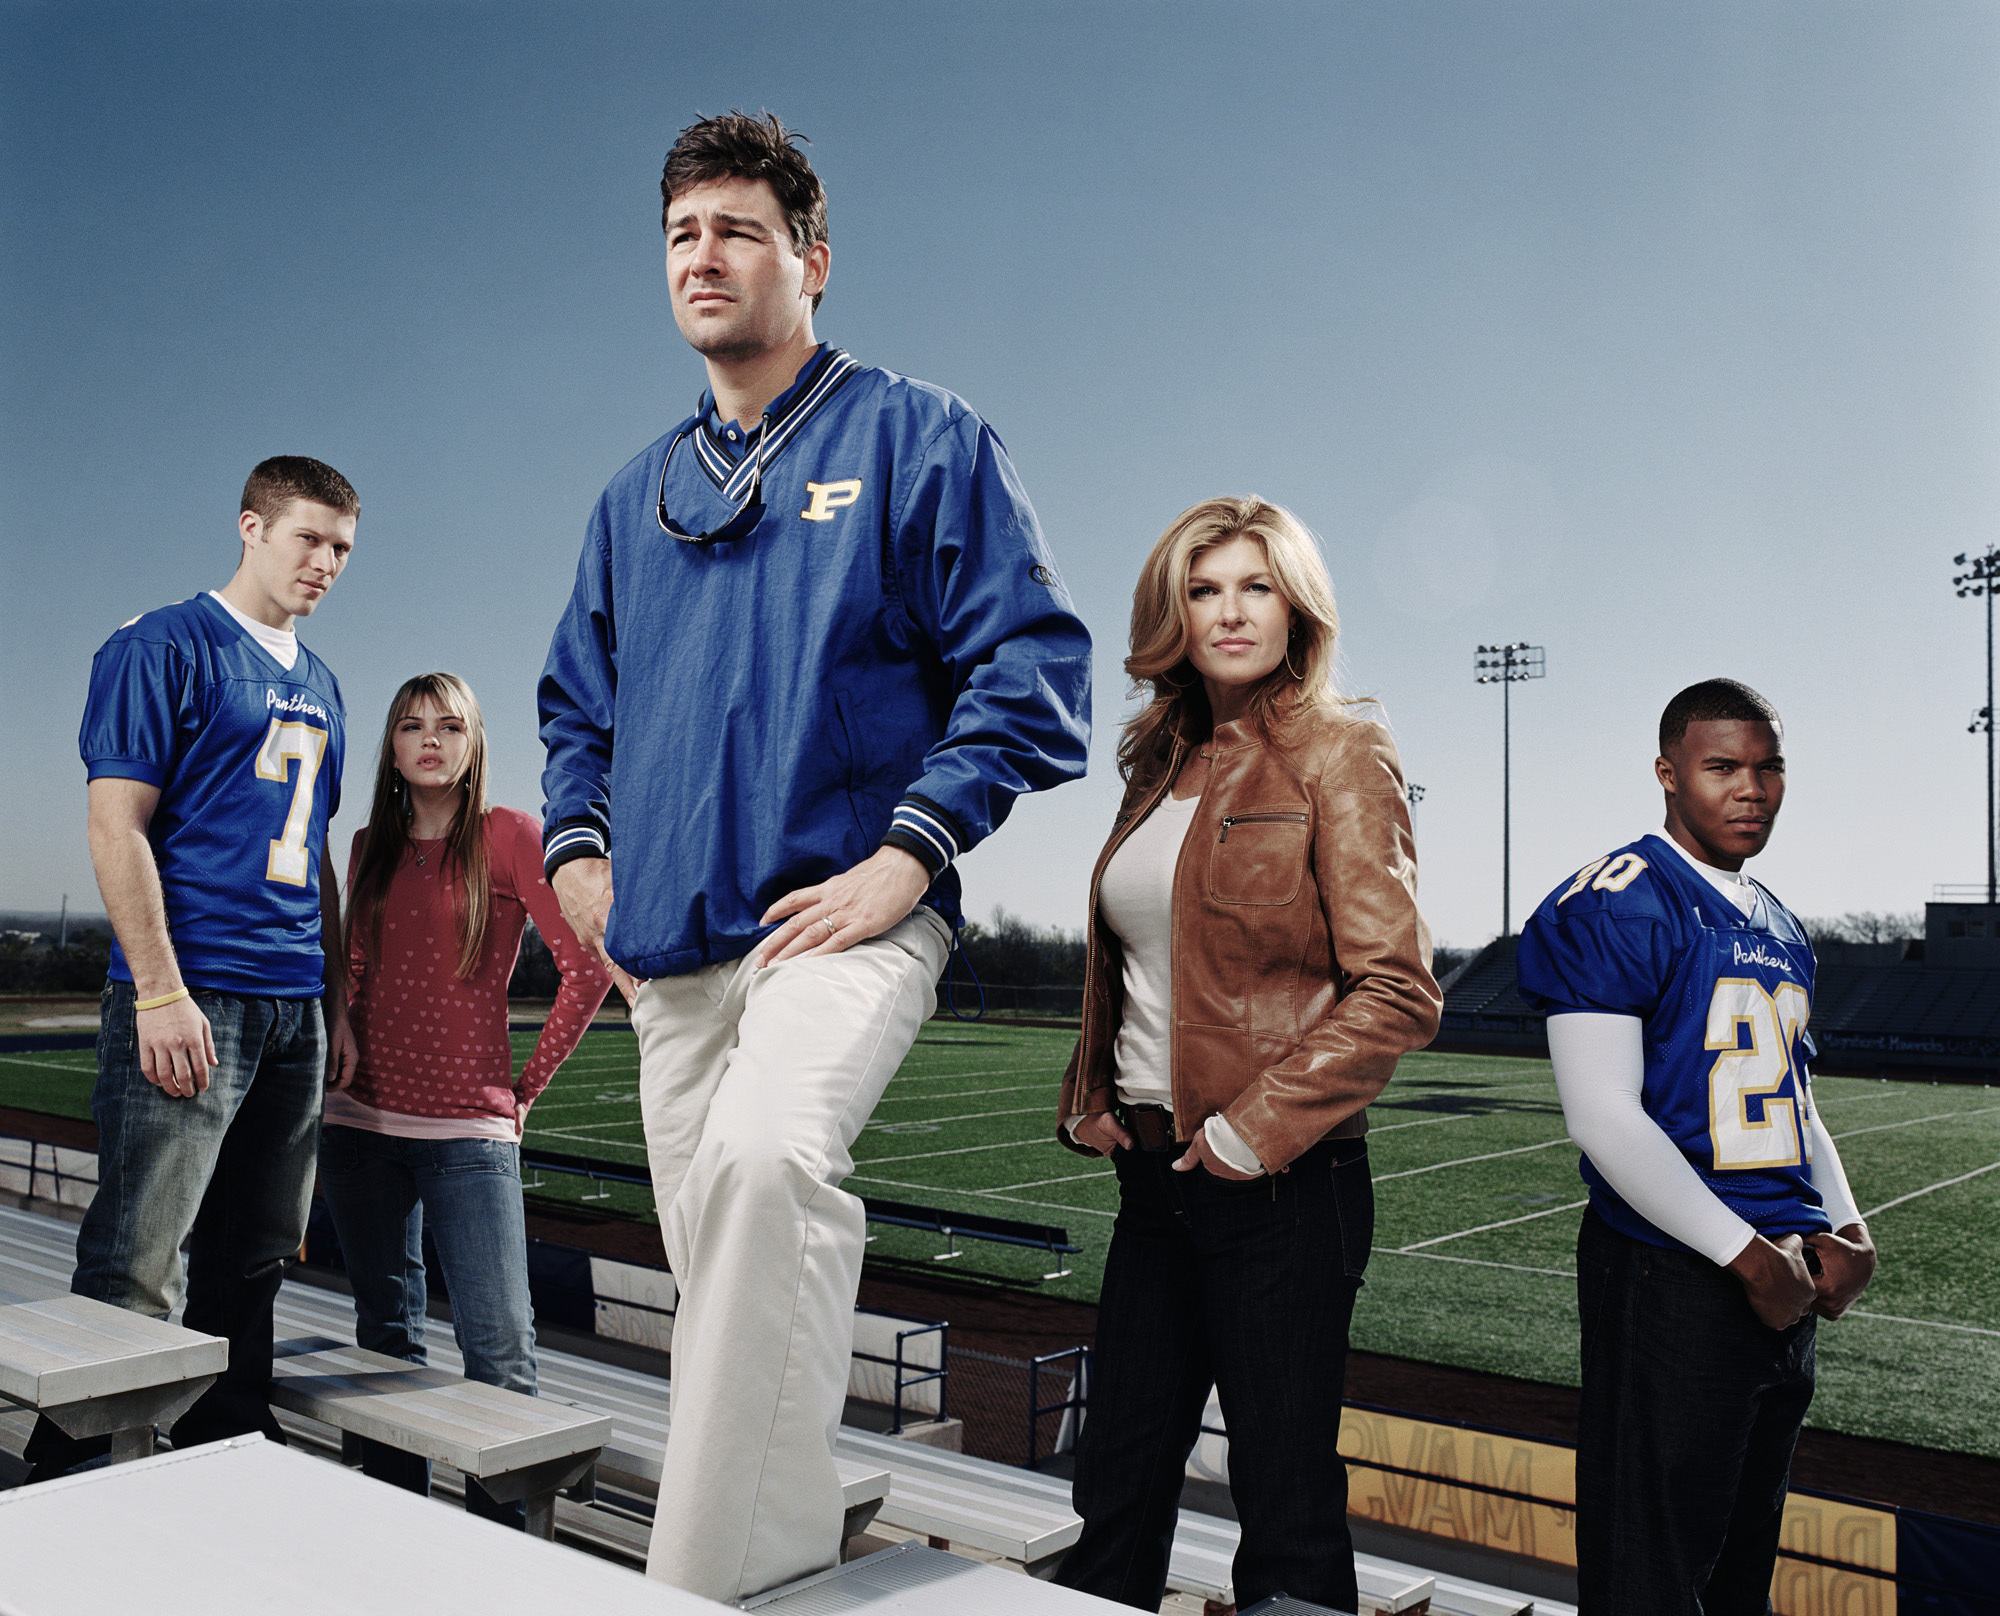 where can i watch the movie friday night lights online